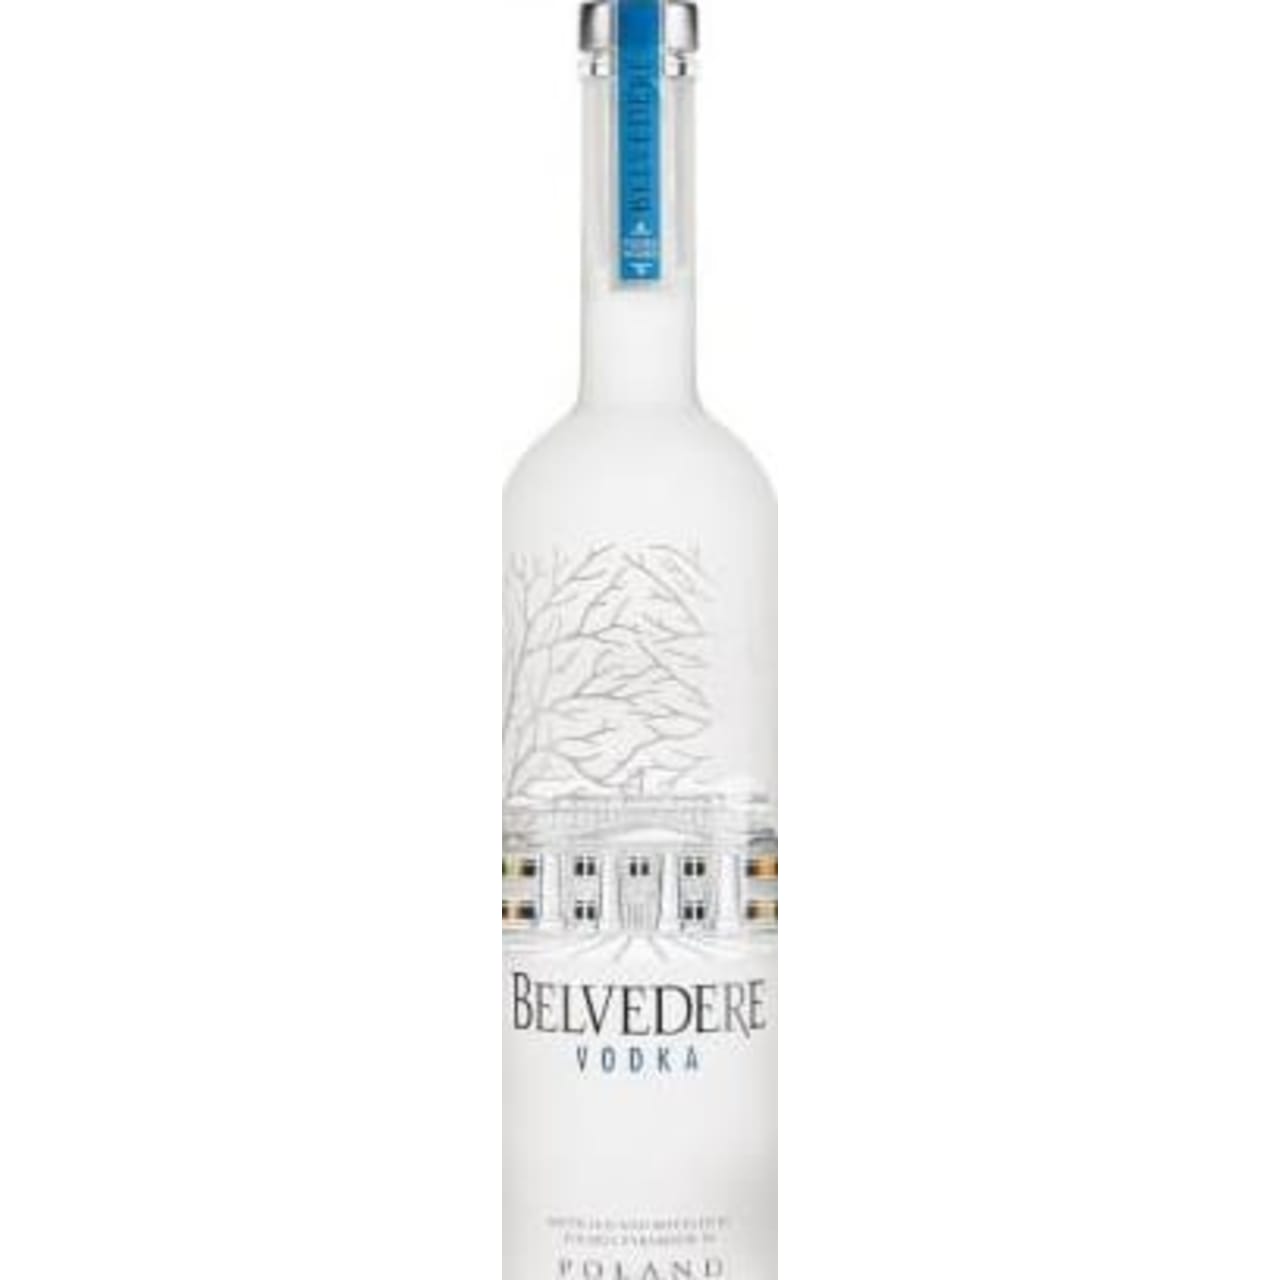 Widely regarded as the world's first super premium vodka!